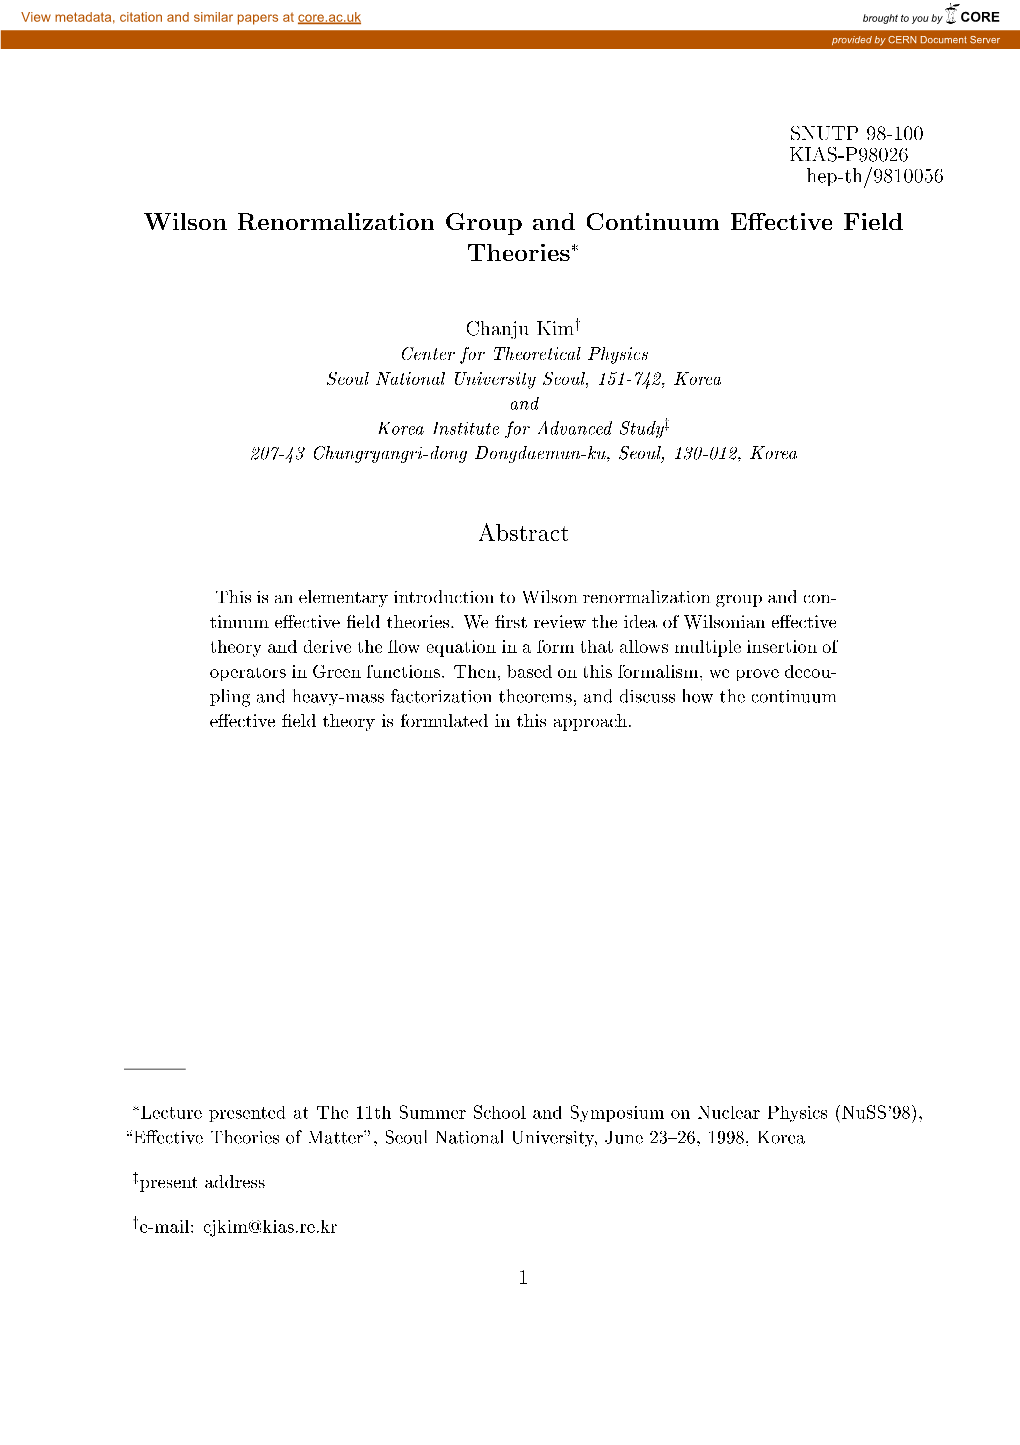 Wilson Renormalization Group and Continuum Effective Field Theories*